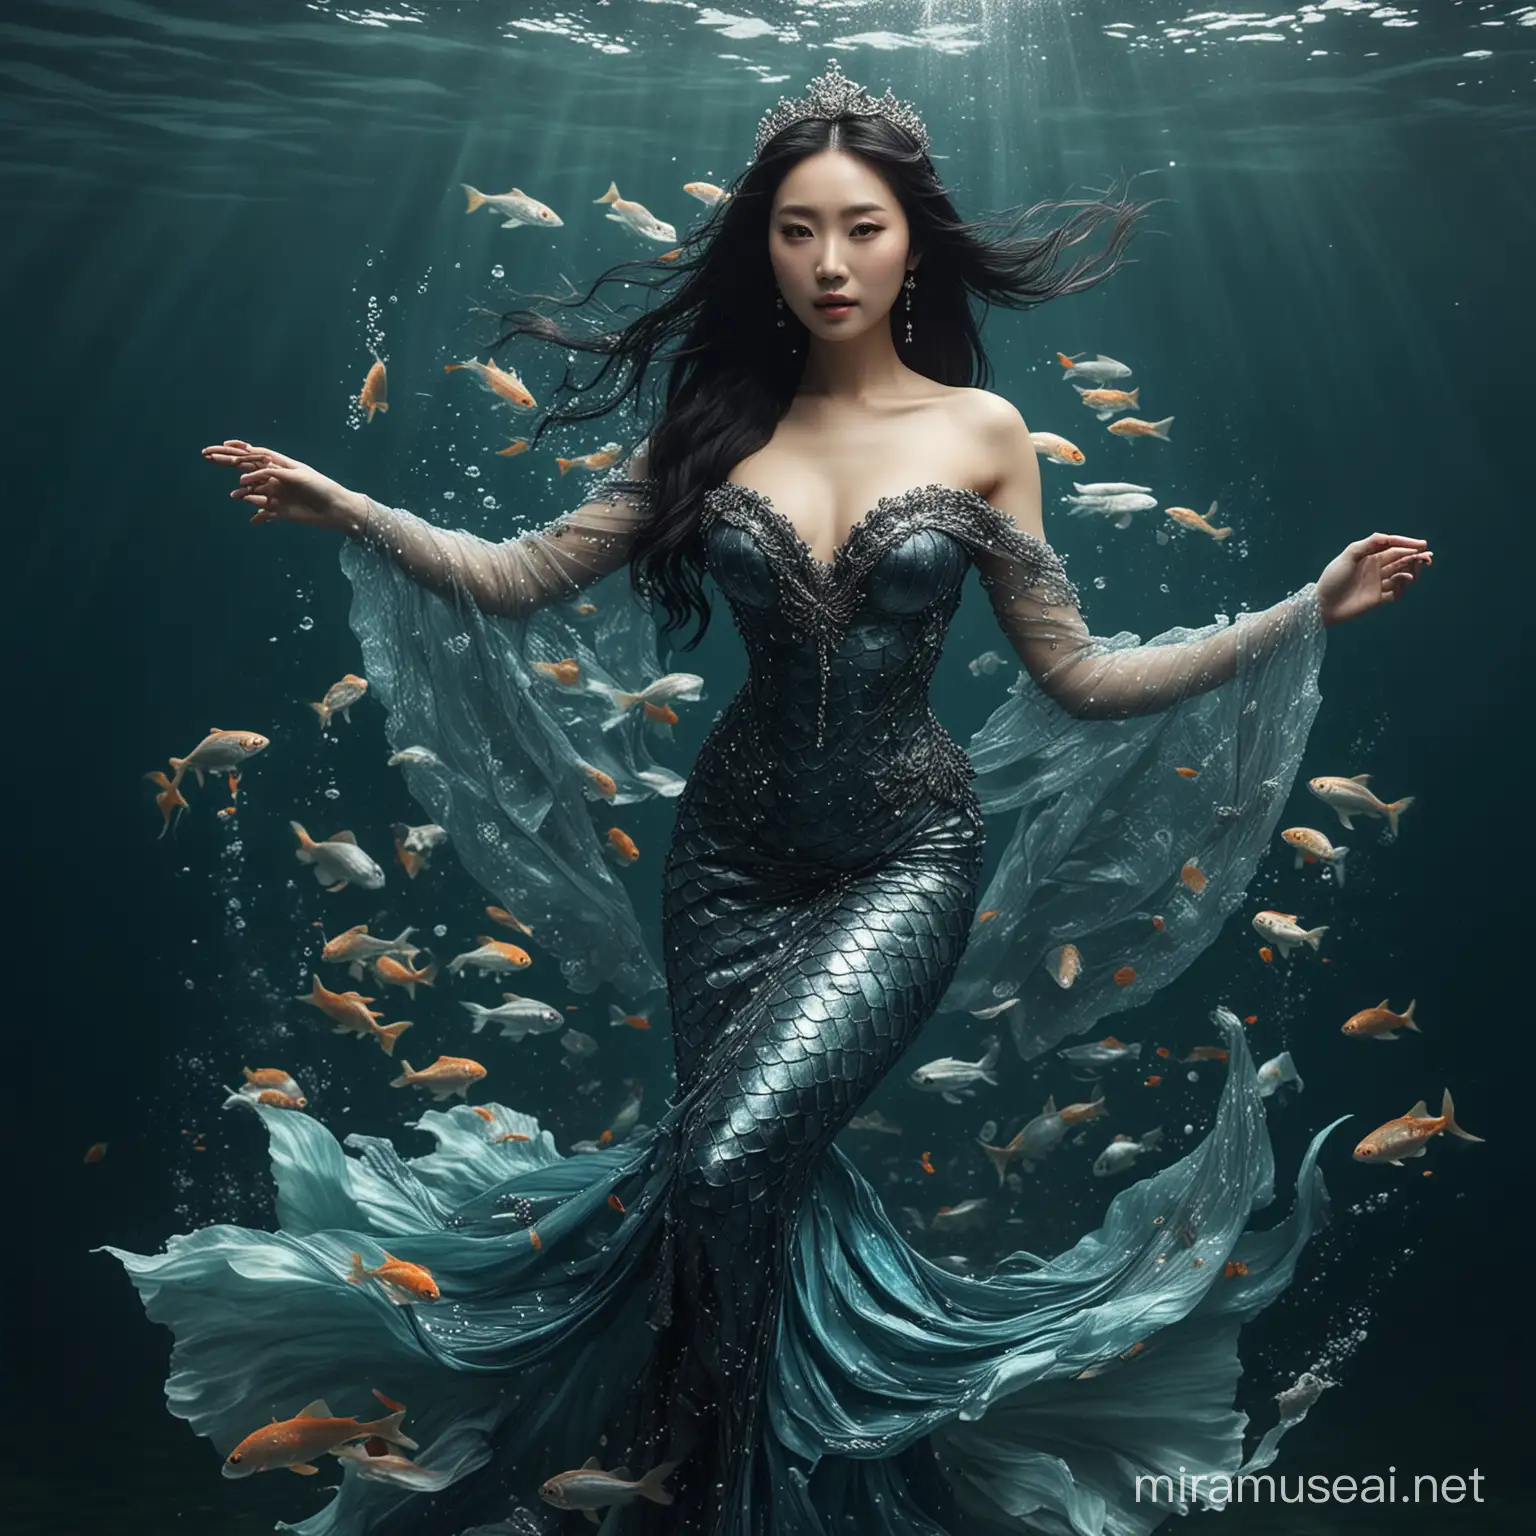 full body of a woman in a dress with fish in the background, queen of the sea mu yanling, real photoshoot queen of oceans, portrait of mermaid queen, portrait of black mermaid, portrait of mermaid, jingna zhang, beautiful mermaid, asian female water elemental, goddess of the ocean, closeup fantasy with water magic, wenfei ye, inspired by Wen Jia